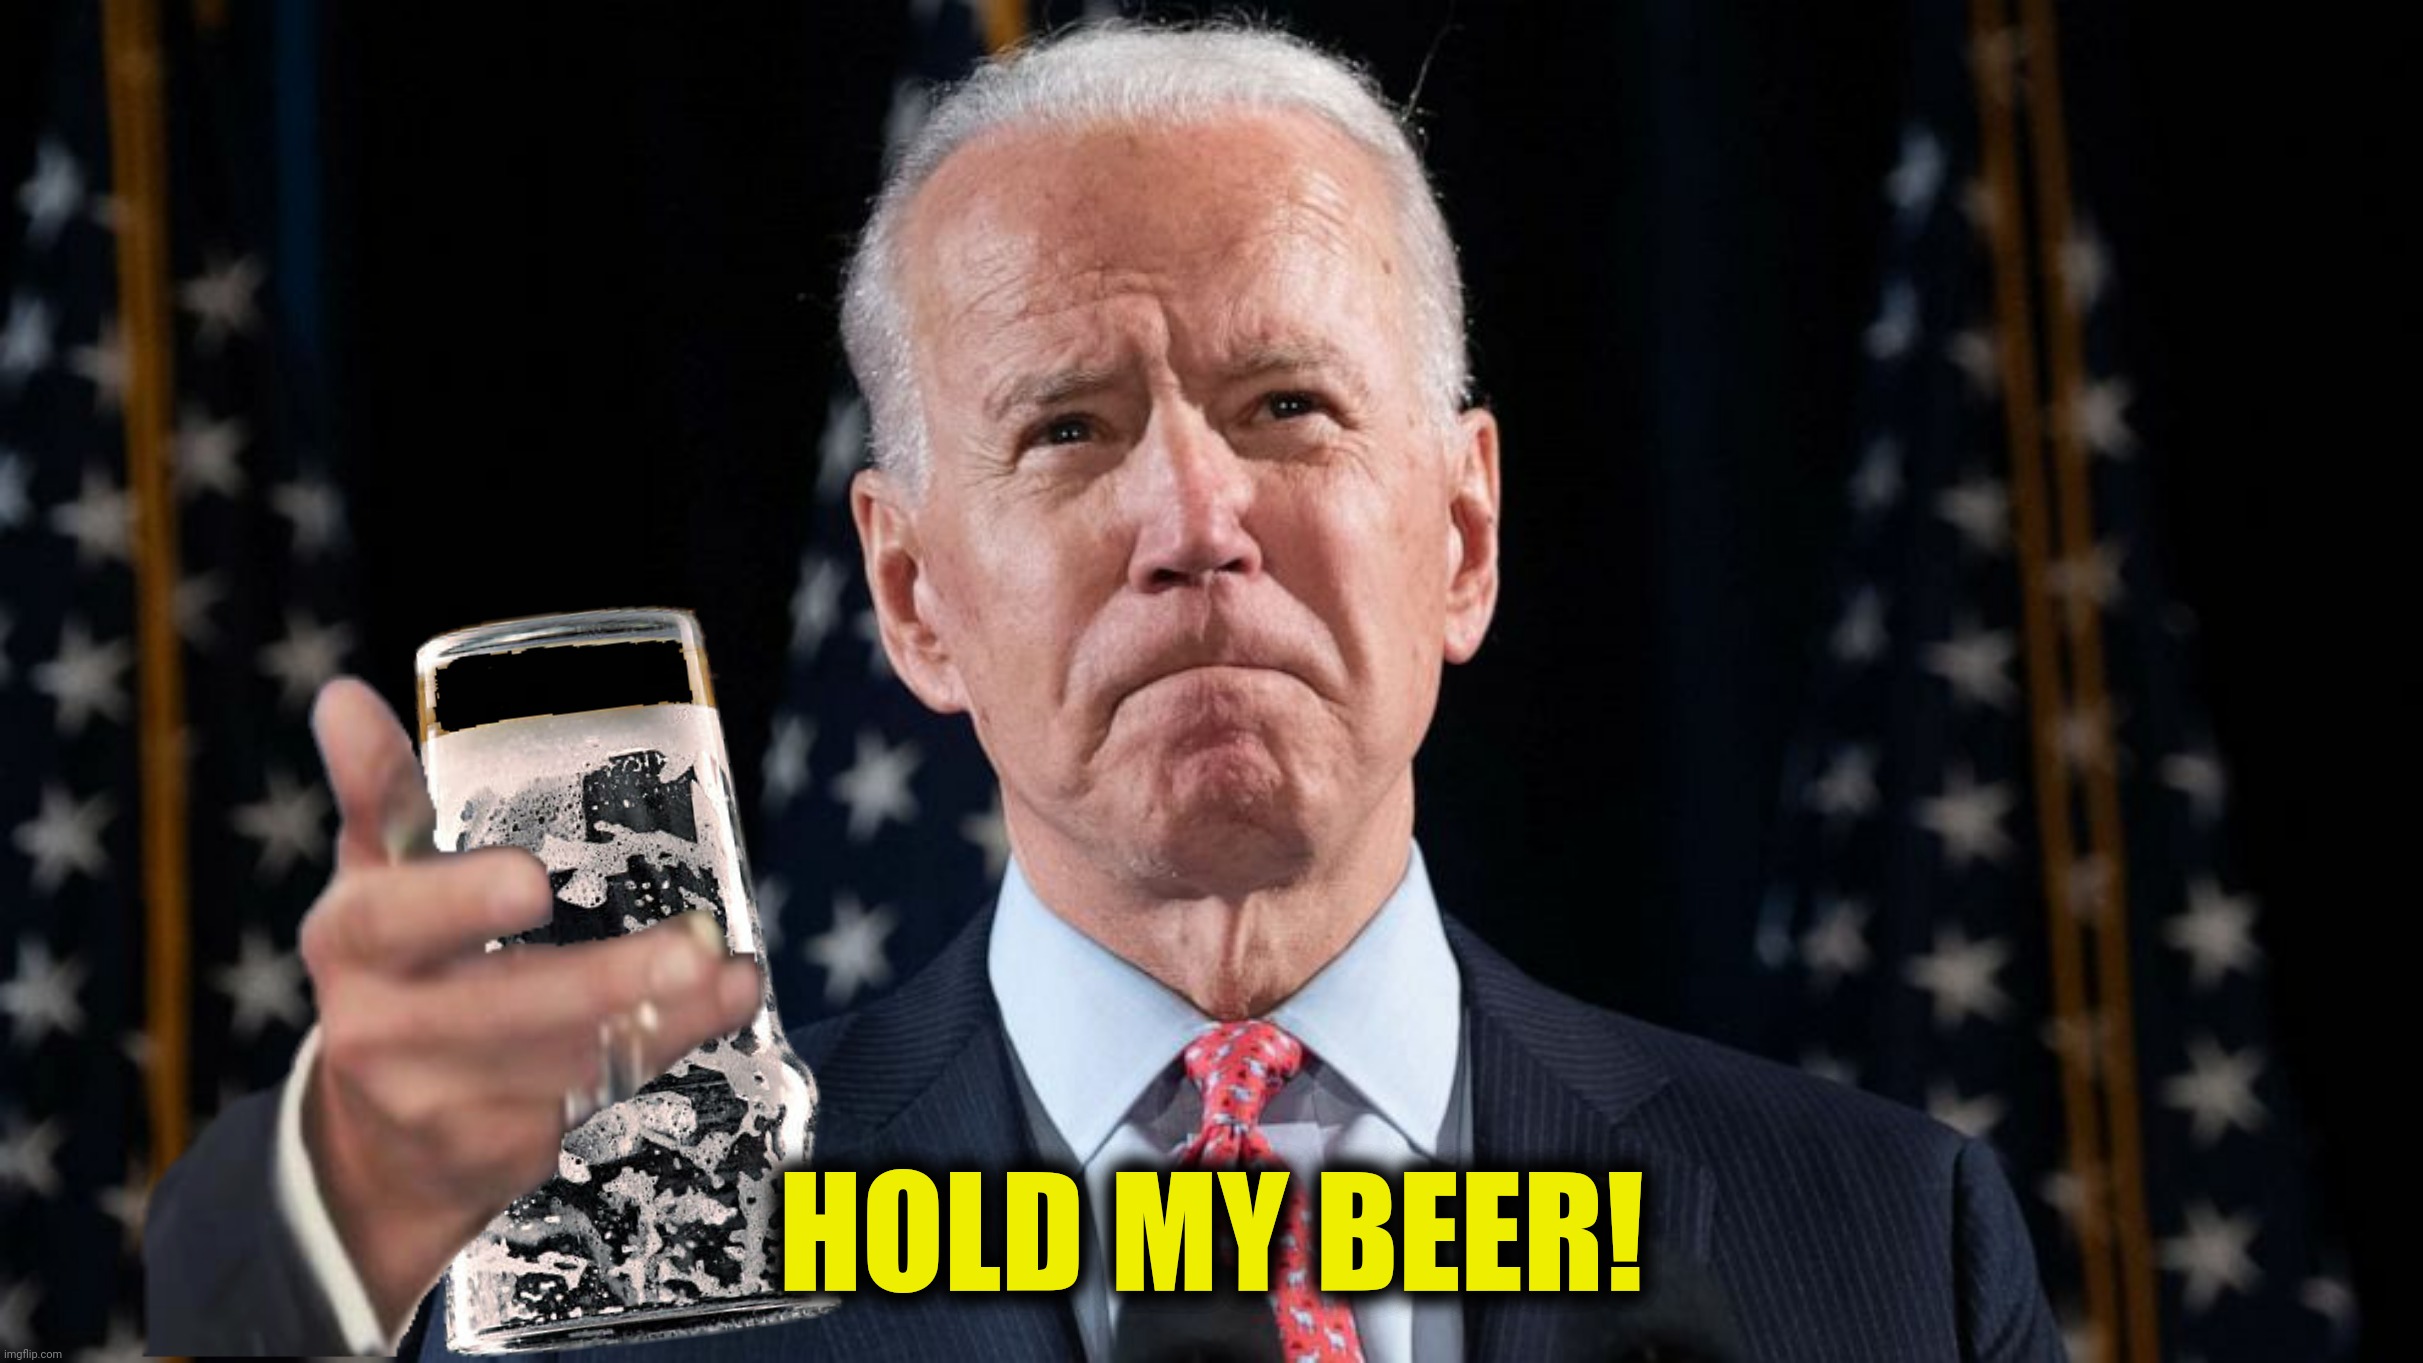 HOLD MY BEER! | made w/ Imgflip meme maker